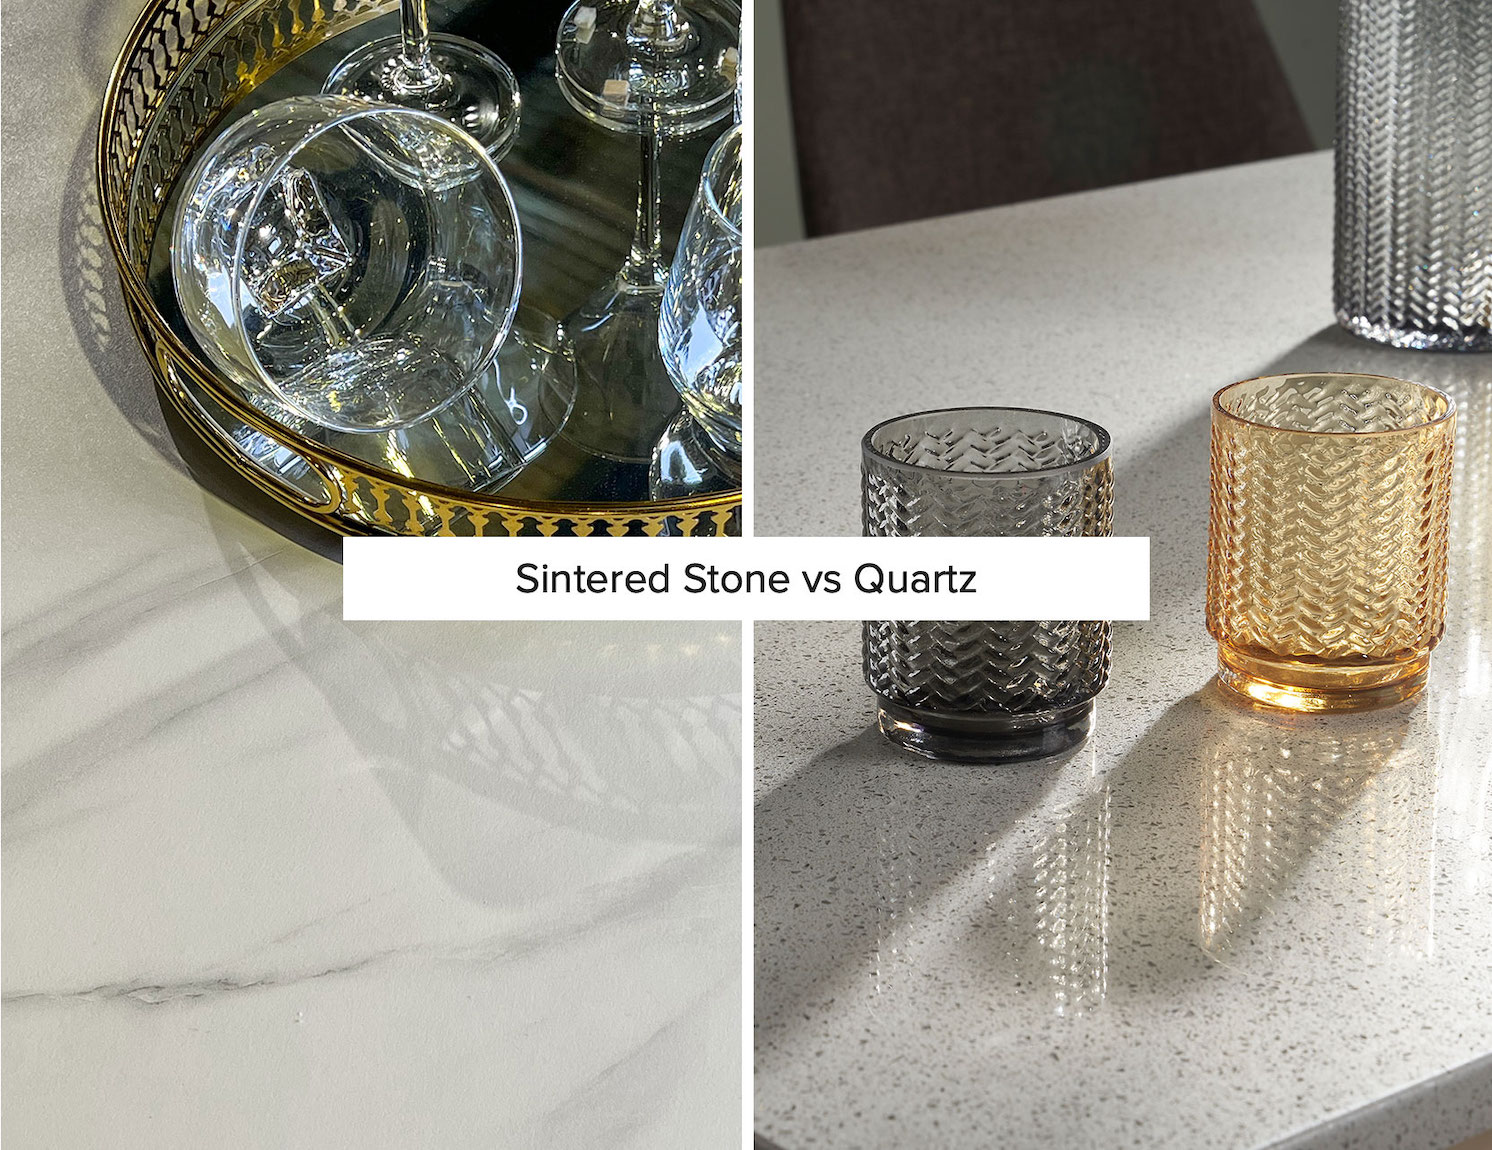 The Battle of Sintered Stone vs Quartz in the Dining Room